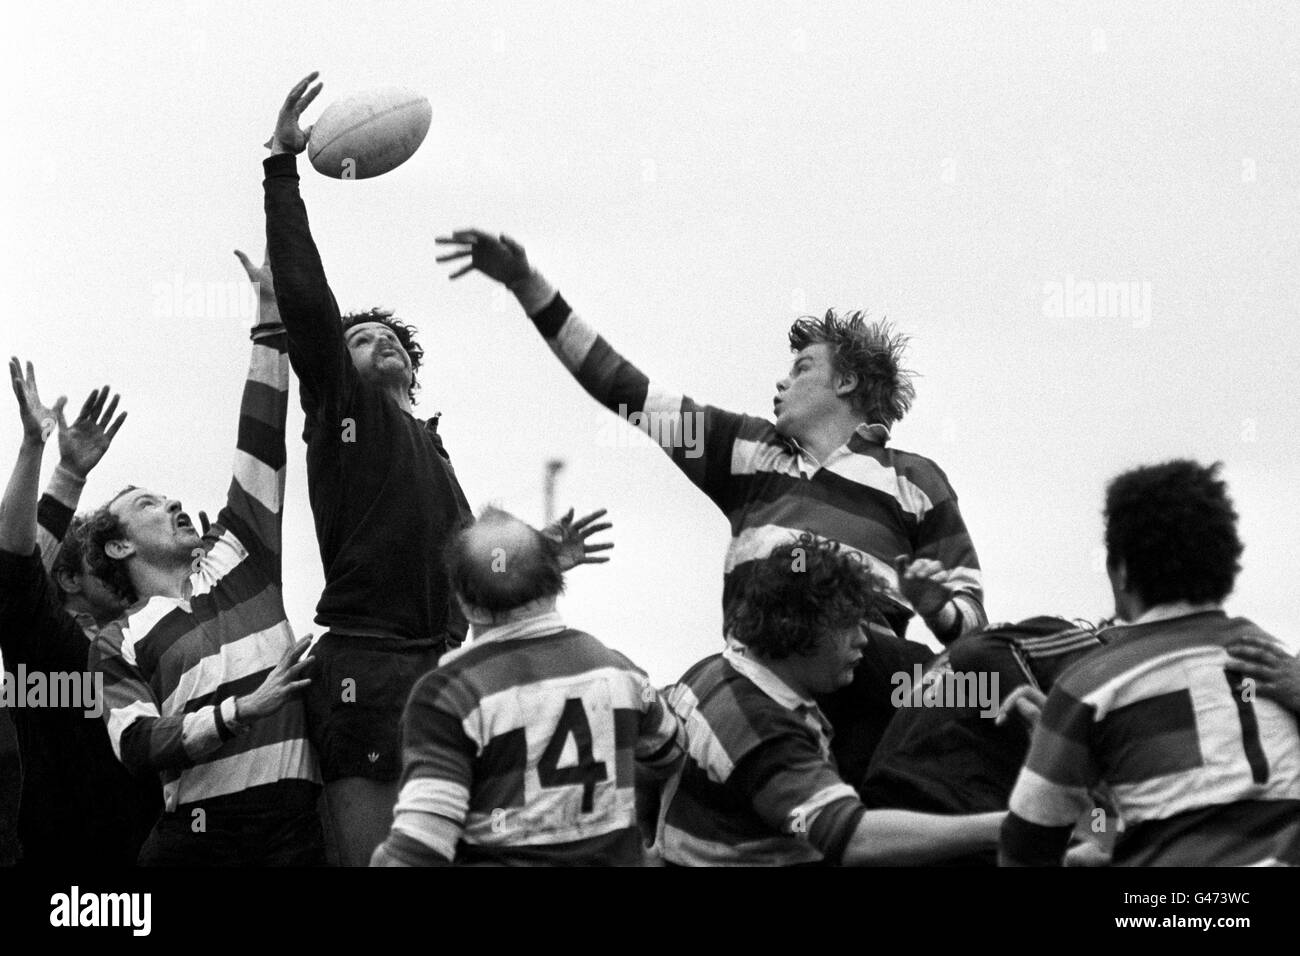 Rugby Union - John Player Cup - Wasps v Waterloo - Sudbury. Wasps J Bonner (dark jersey) wins a line out from Waterloo's AM Flett Stock Photo